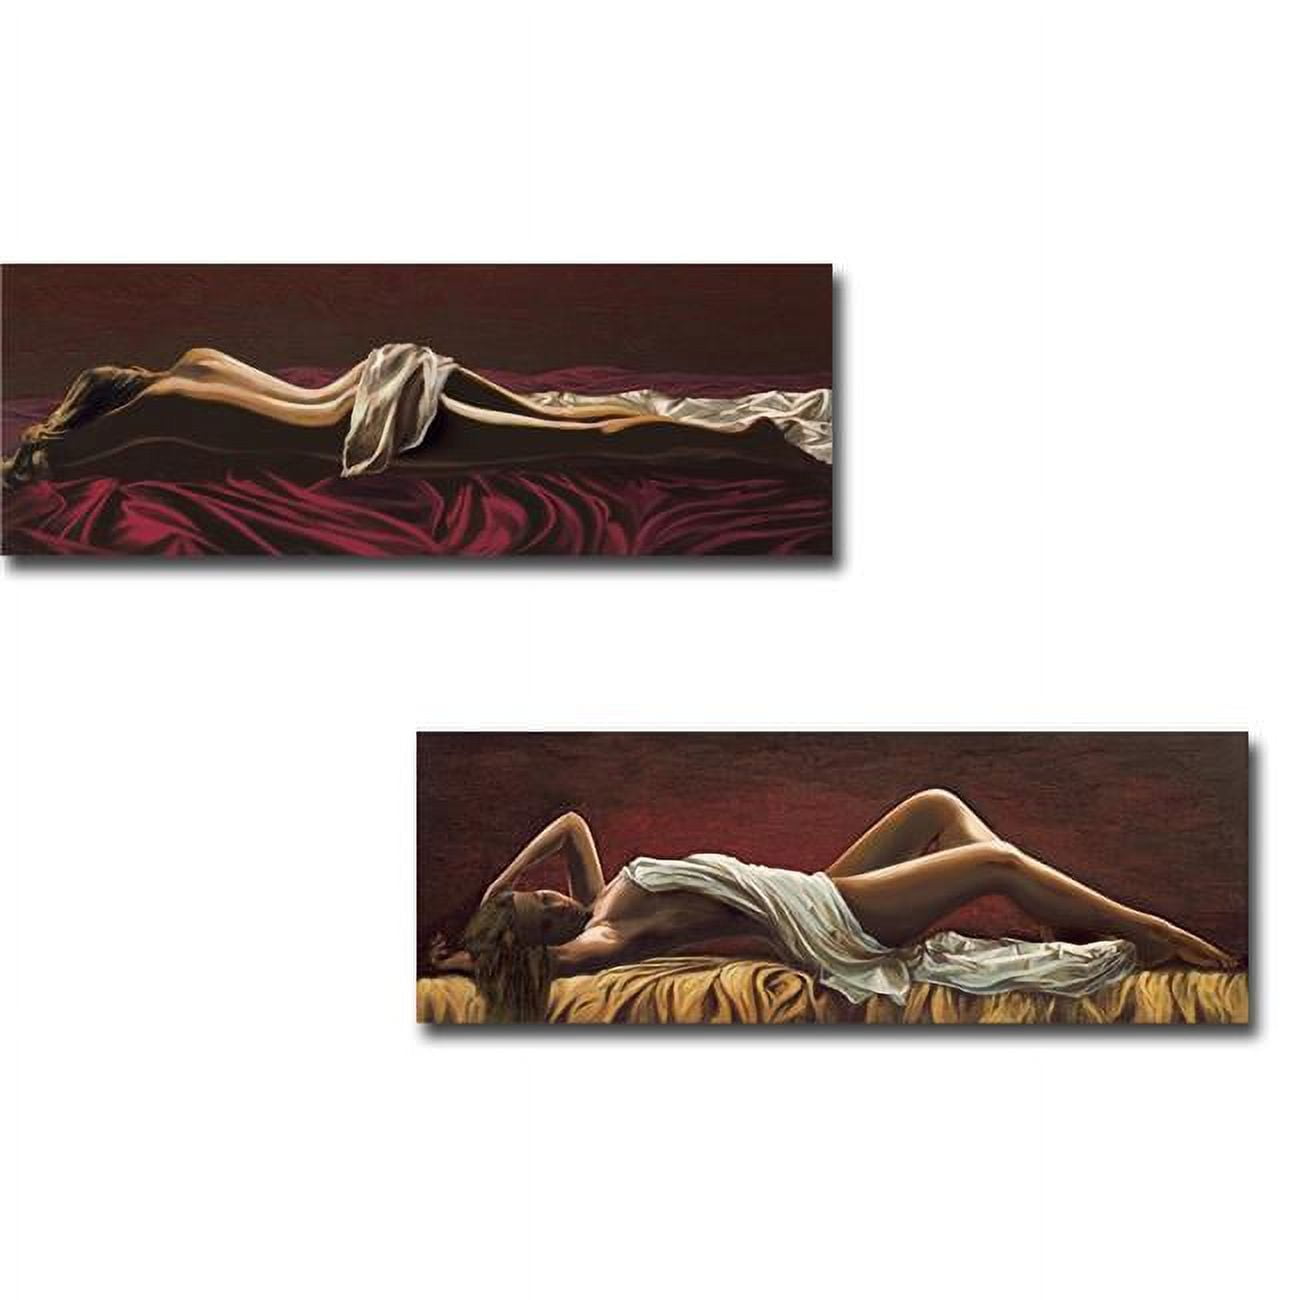 1648765tg Incanto Notturno By Giorgio Mariani 2-piece Premium Oversize Gallery-wrapped Canvas Giclee Art Set & Dolce Sognare - 16 X 48 In.